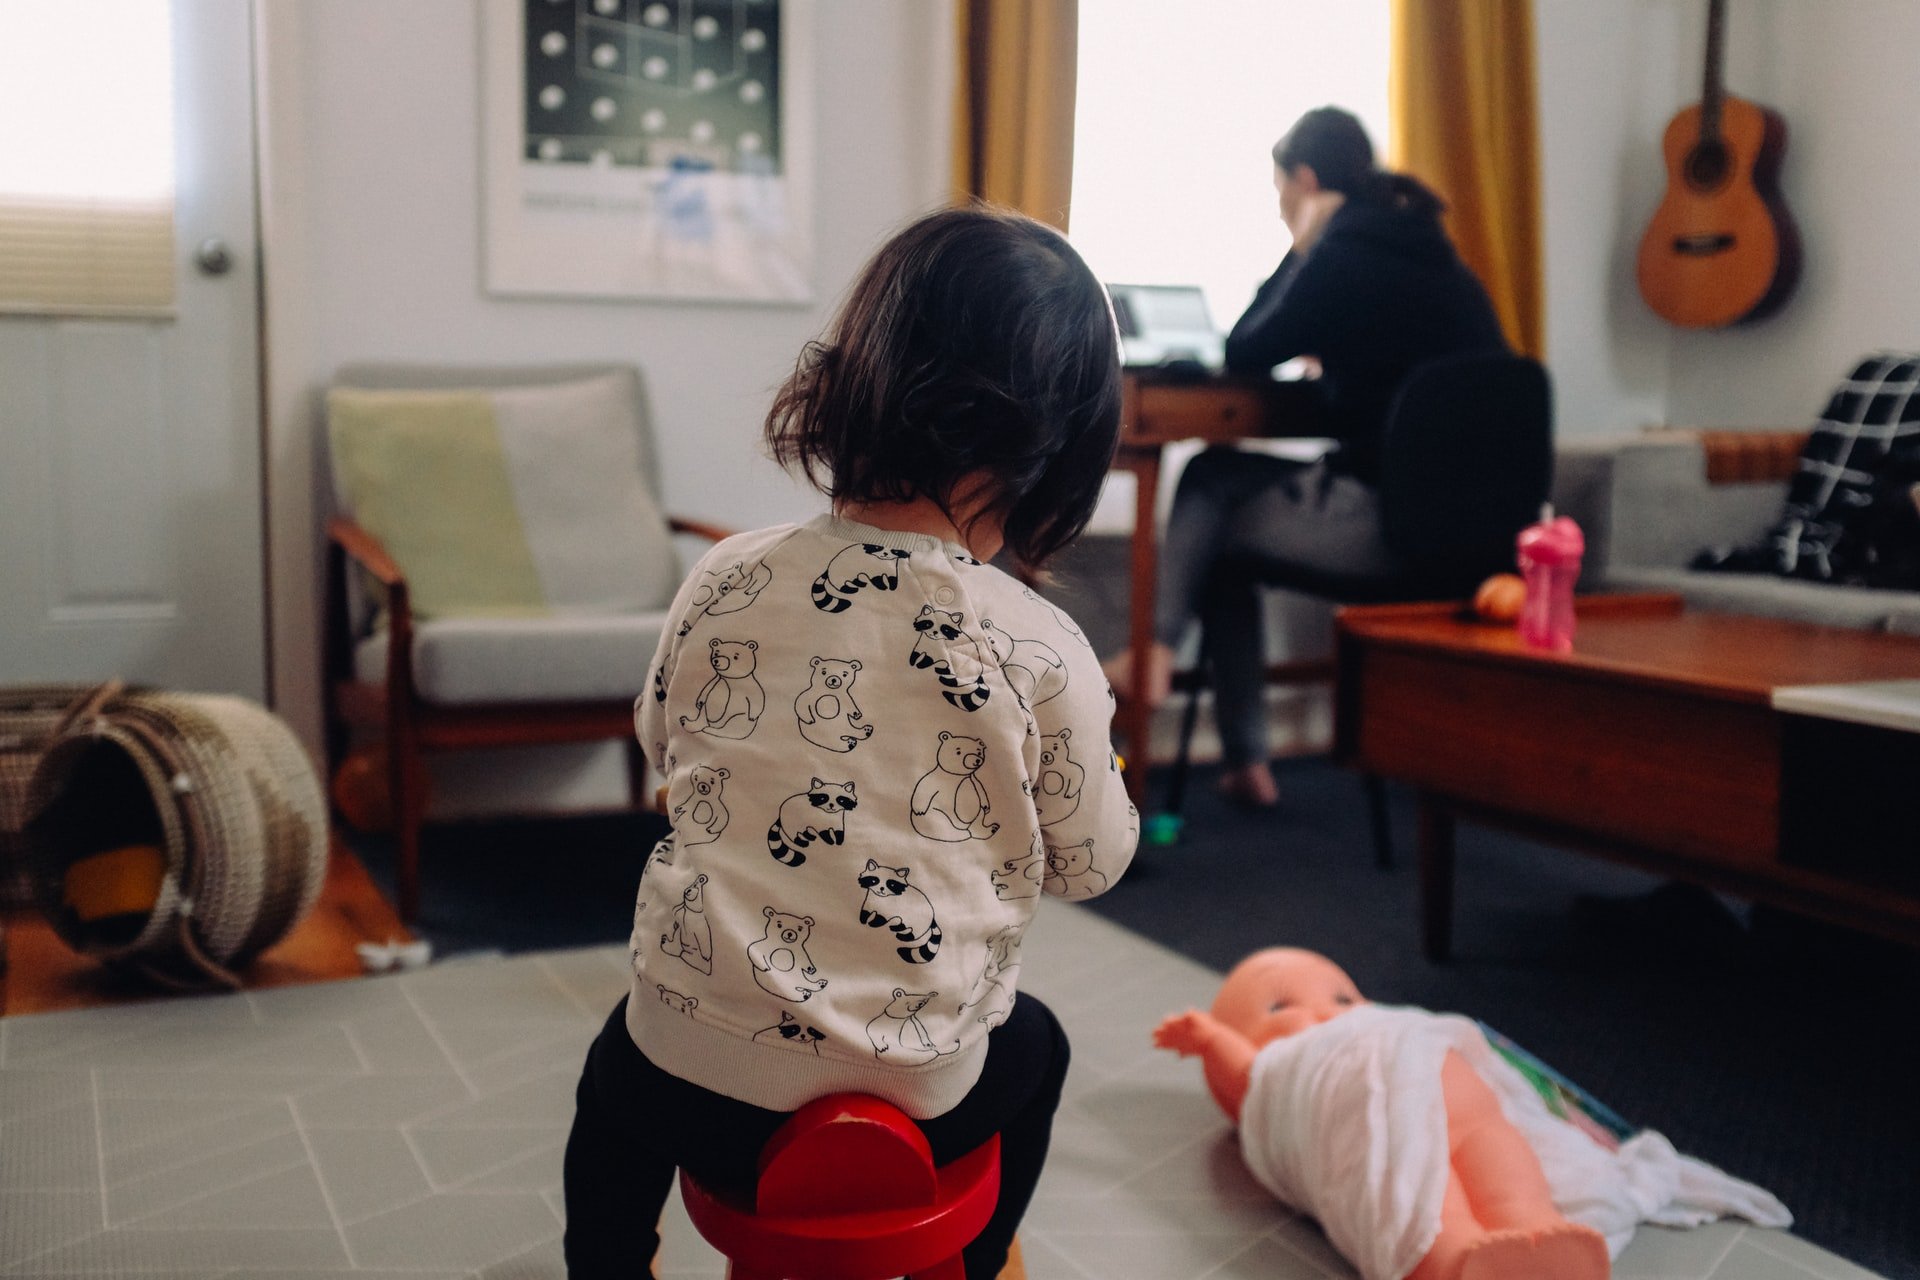 Child playing while parent works on computer in background